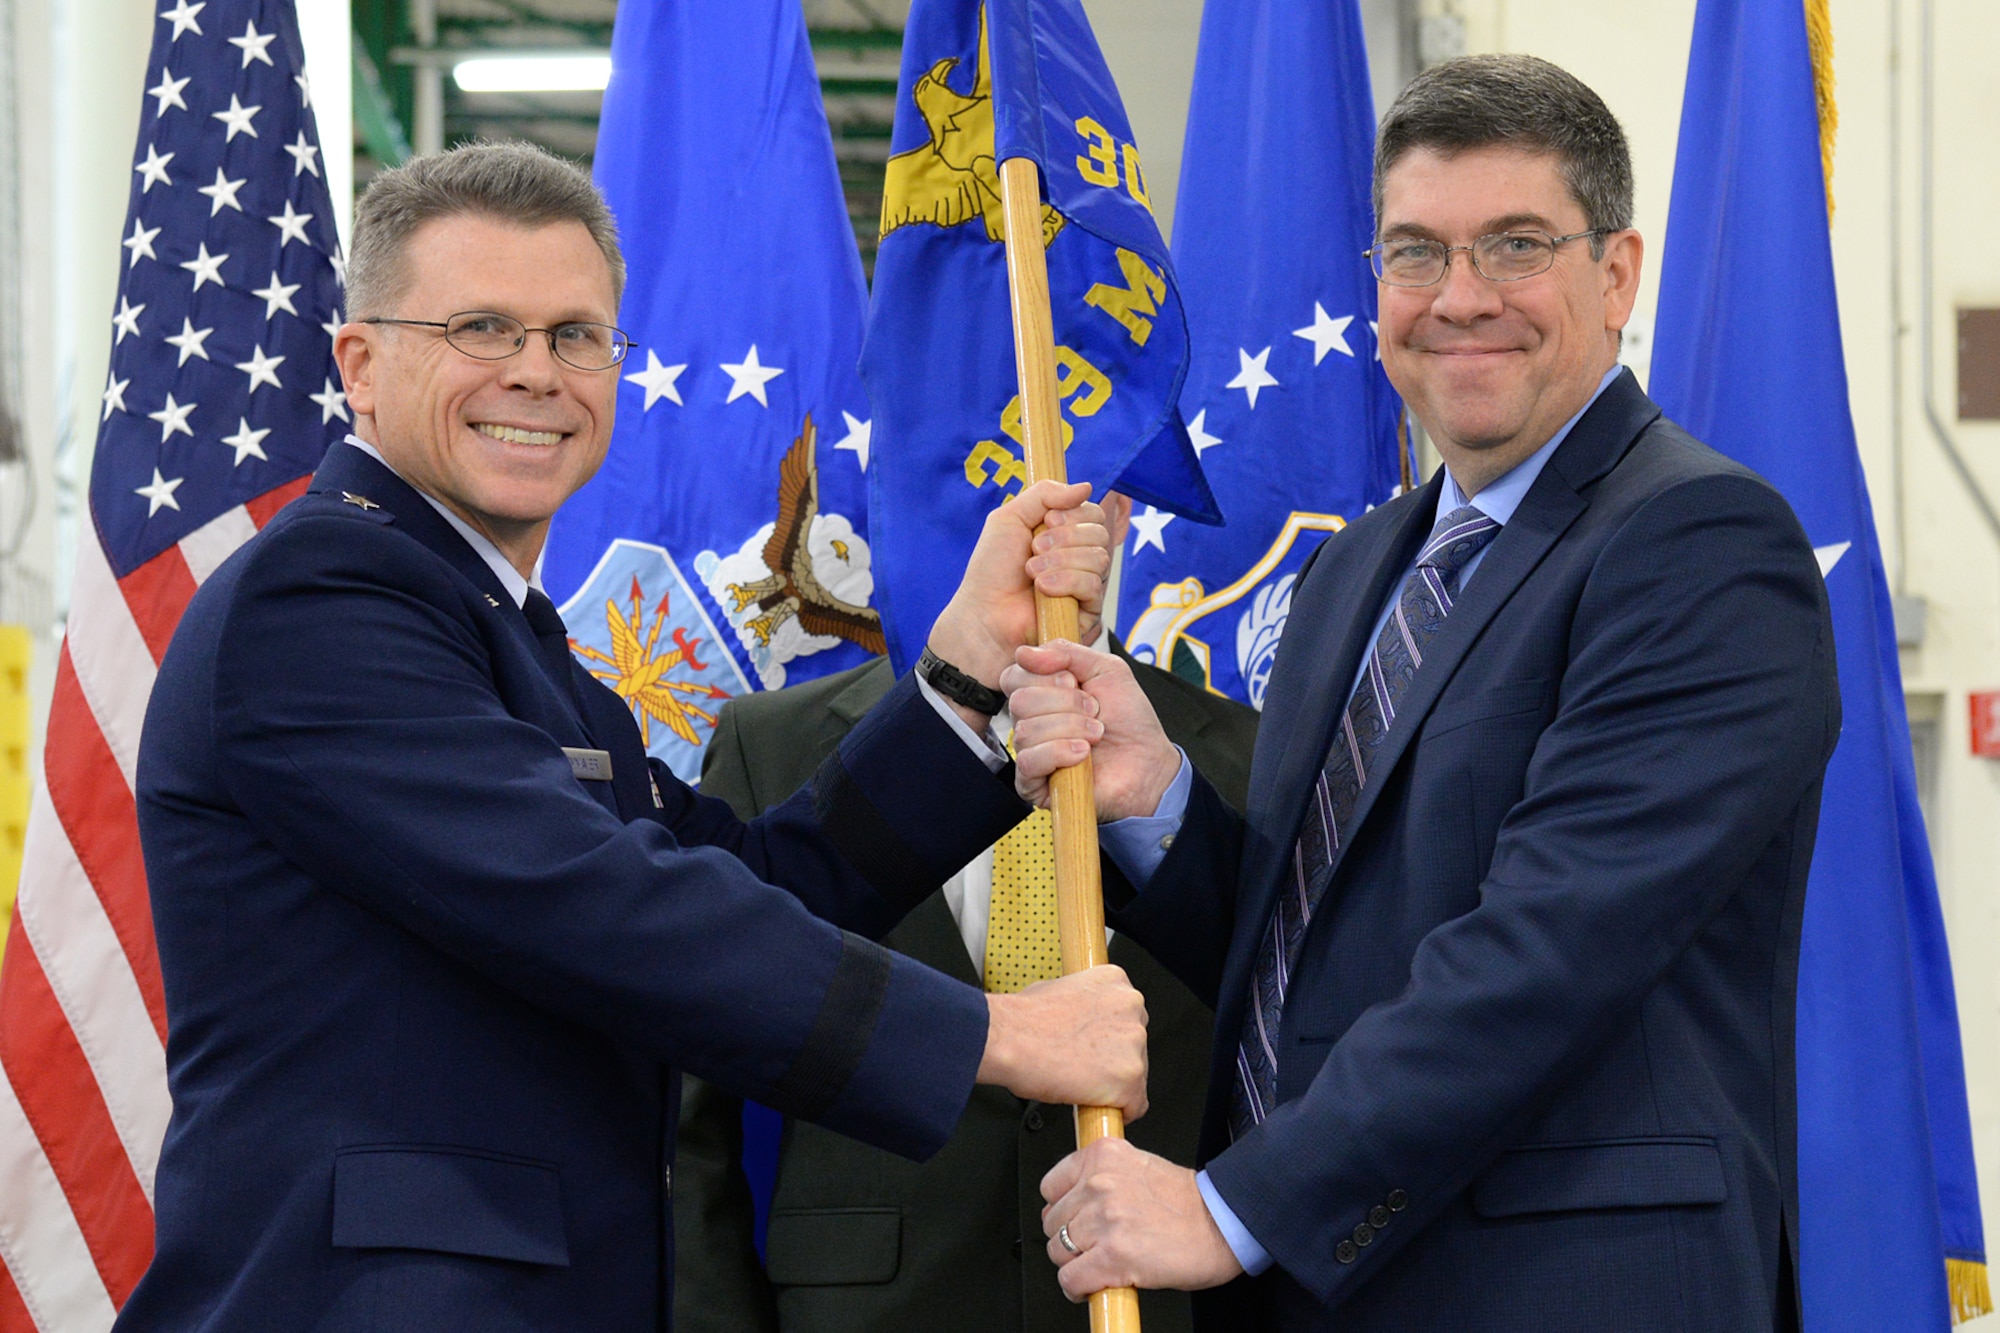 Brig. Gen. Steven J. Bleymaier (left), Ogden Air Logistics Complex commander, passes the 309th Maintenance Support Group guidon to incoming director Jeff Wandrey during a change of leadership ceremony held Dec. 5 at Hill Air Force Base, Utah. (U.S. Air Force Photo by Alex R. Lloyd)